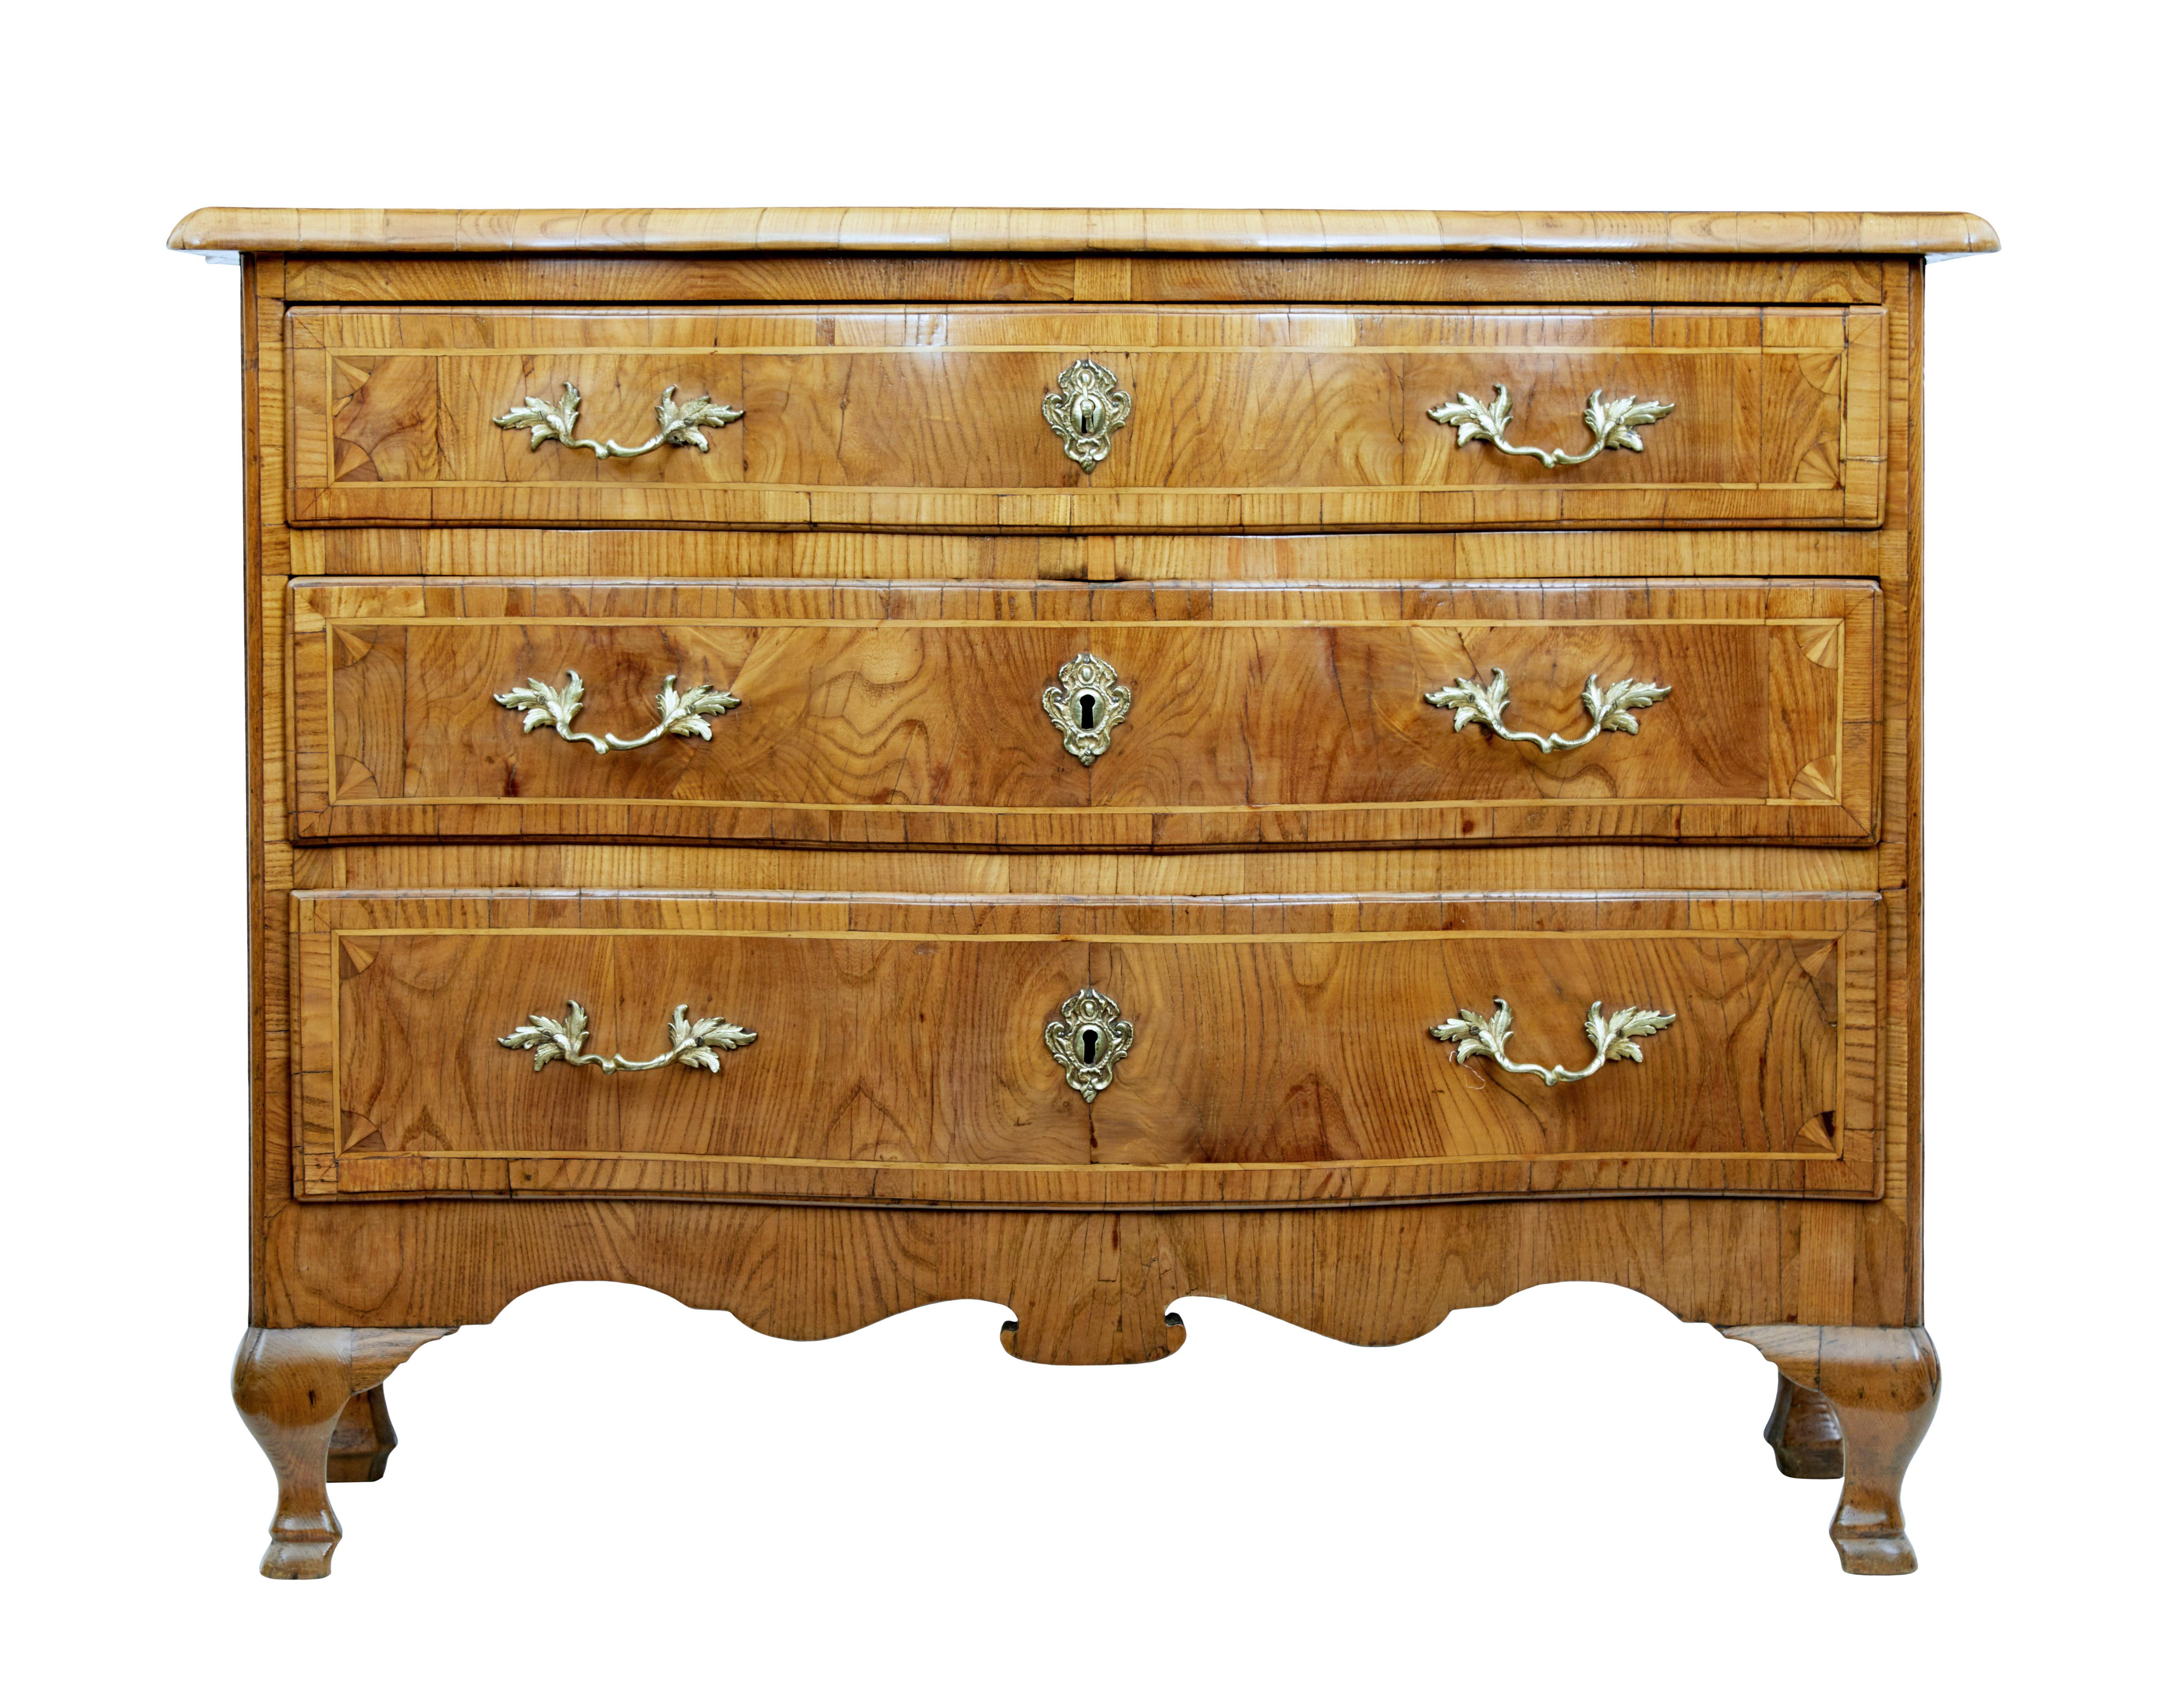 Glorious Rococo period elm commode circa 1780.

Bowfront shaped 3-drawer chest. Shaped over-sailing top which has been crossbanded and strung, complete with a double diamond pattern.

3 graduating drawers in burr elm with ornate handles and